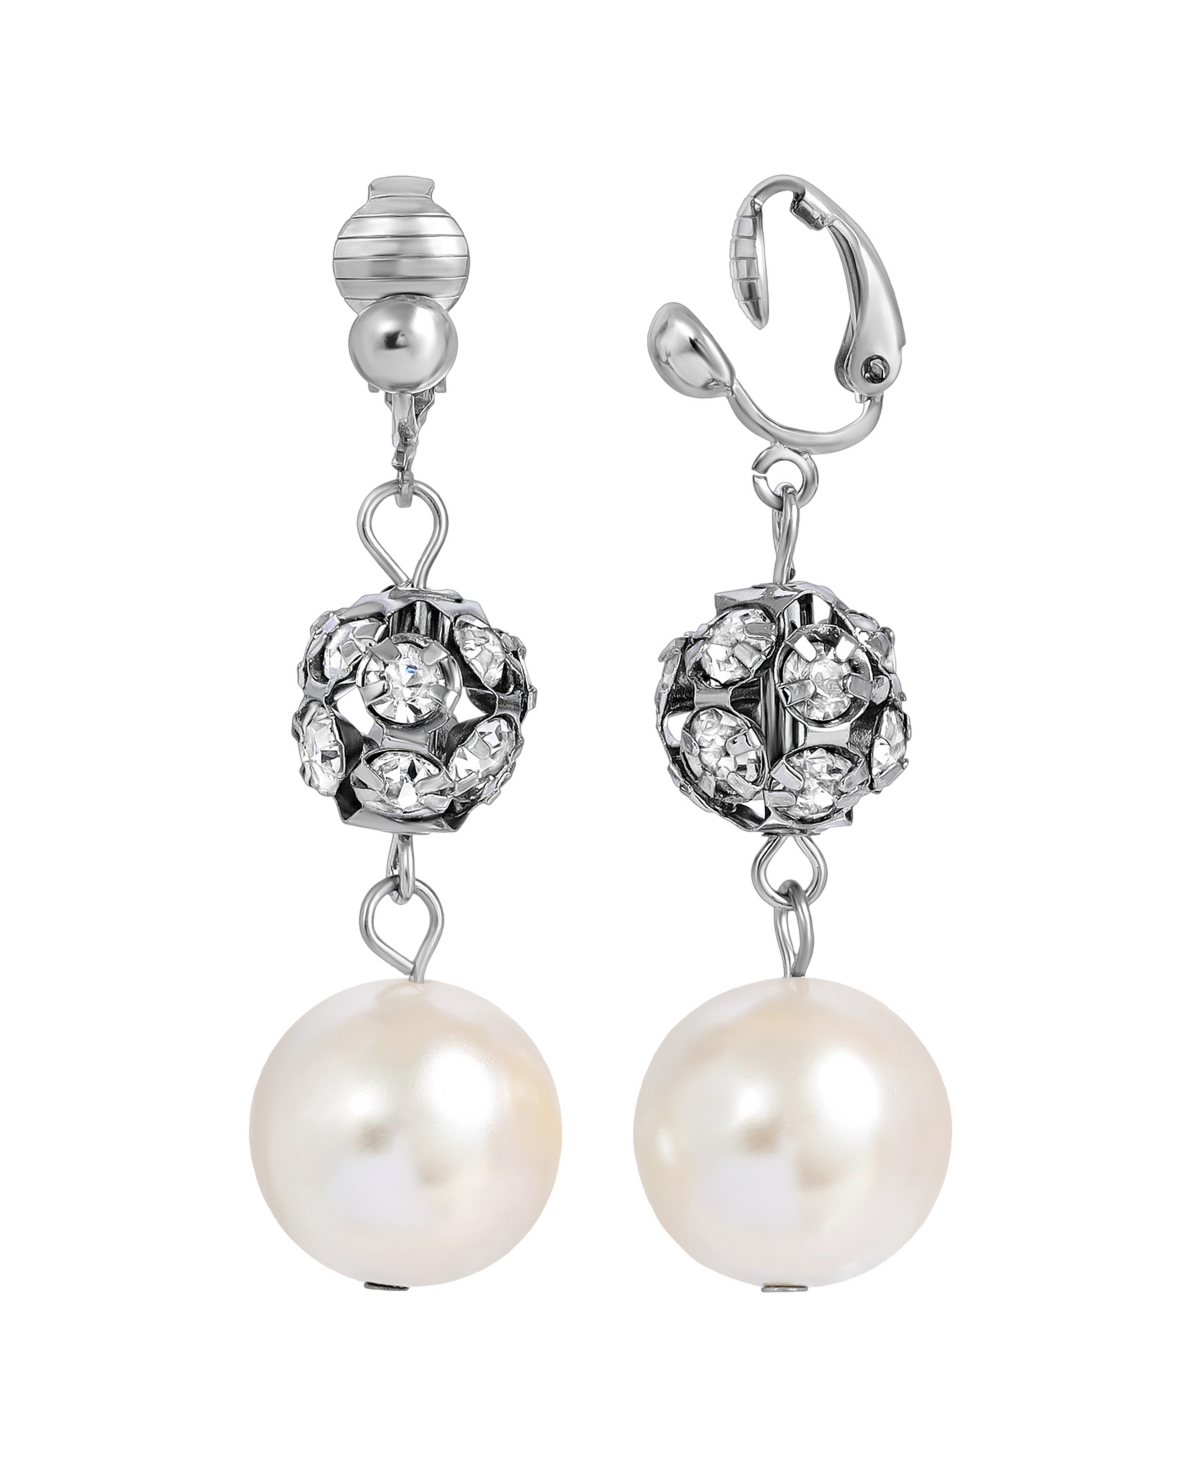 2028 Faux Imitation Pearl And Crystal Fireball Clip Earrings In White